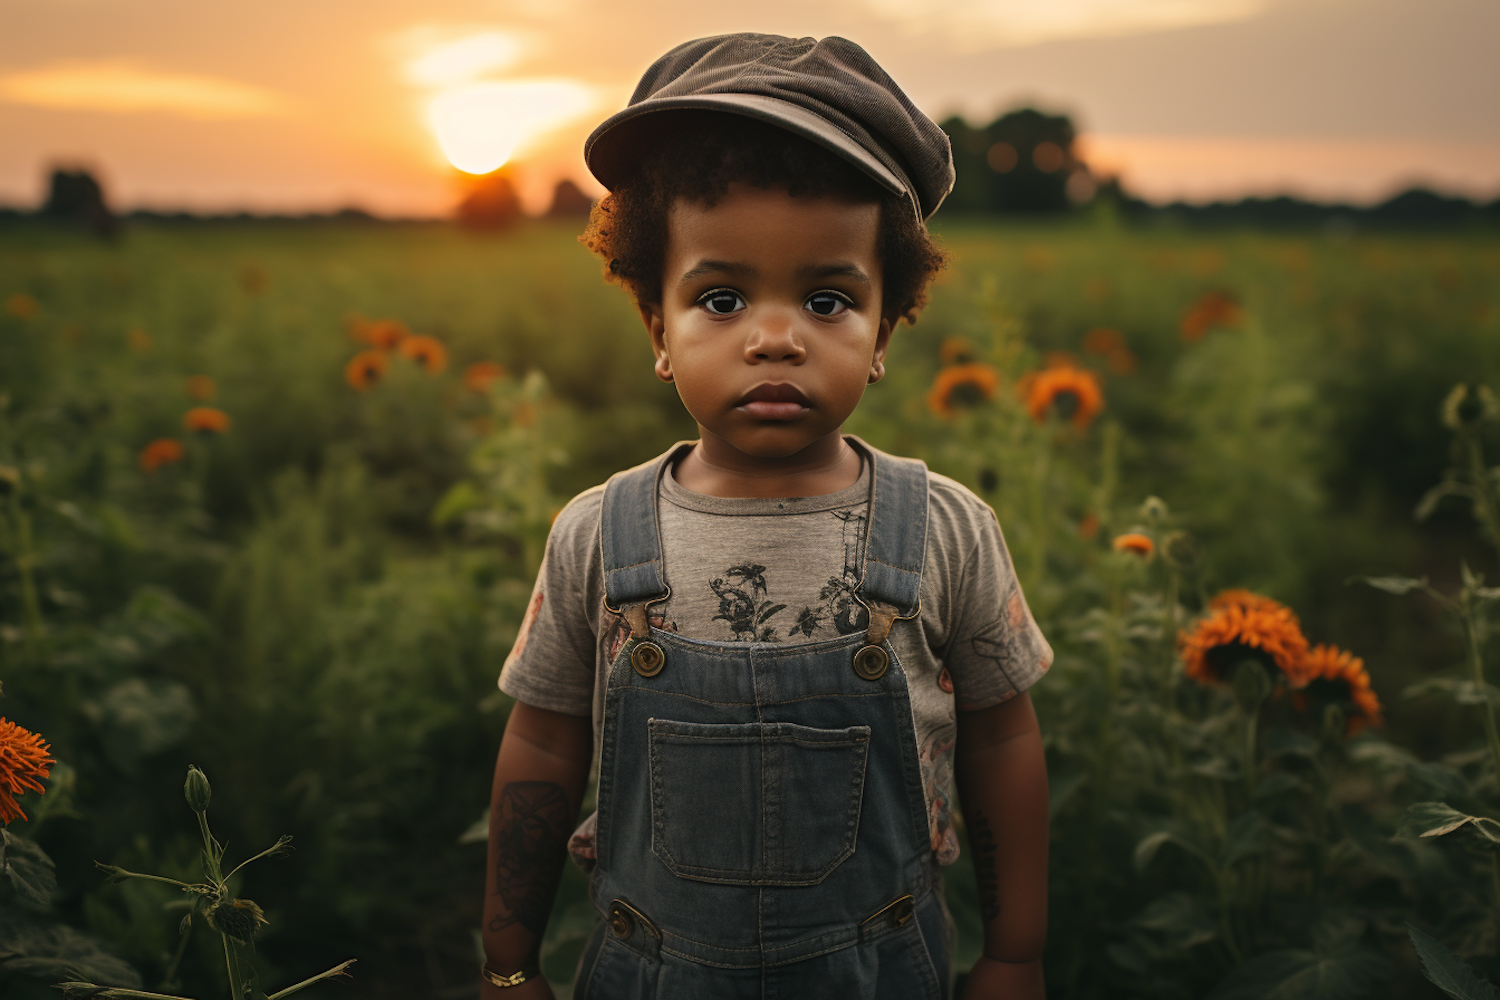 Pensive Child in Sunflower Field at Golden Hour